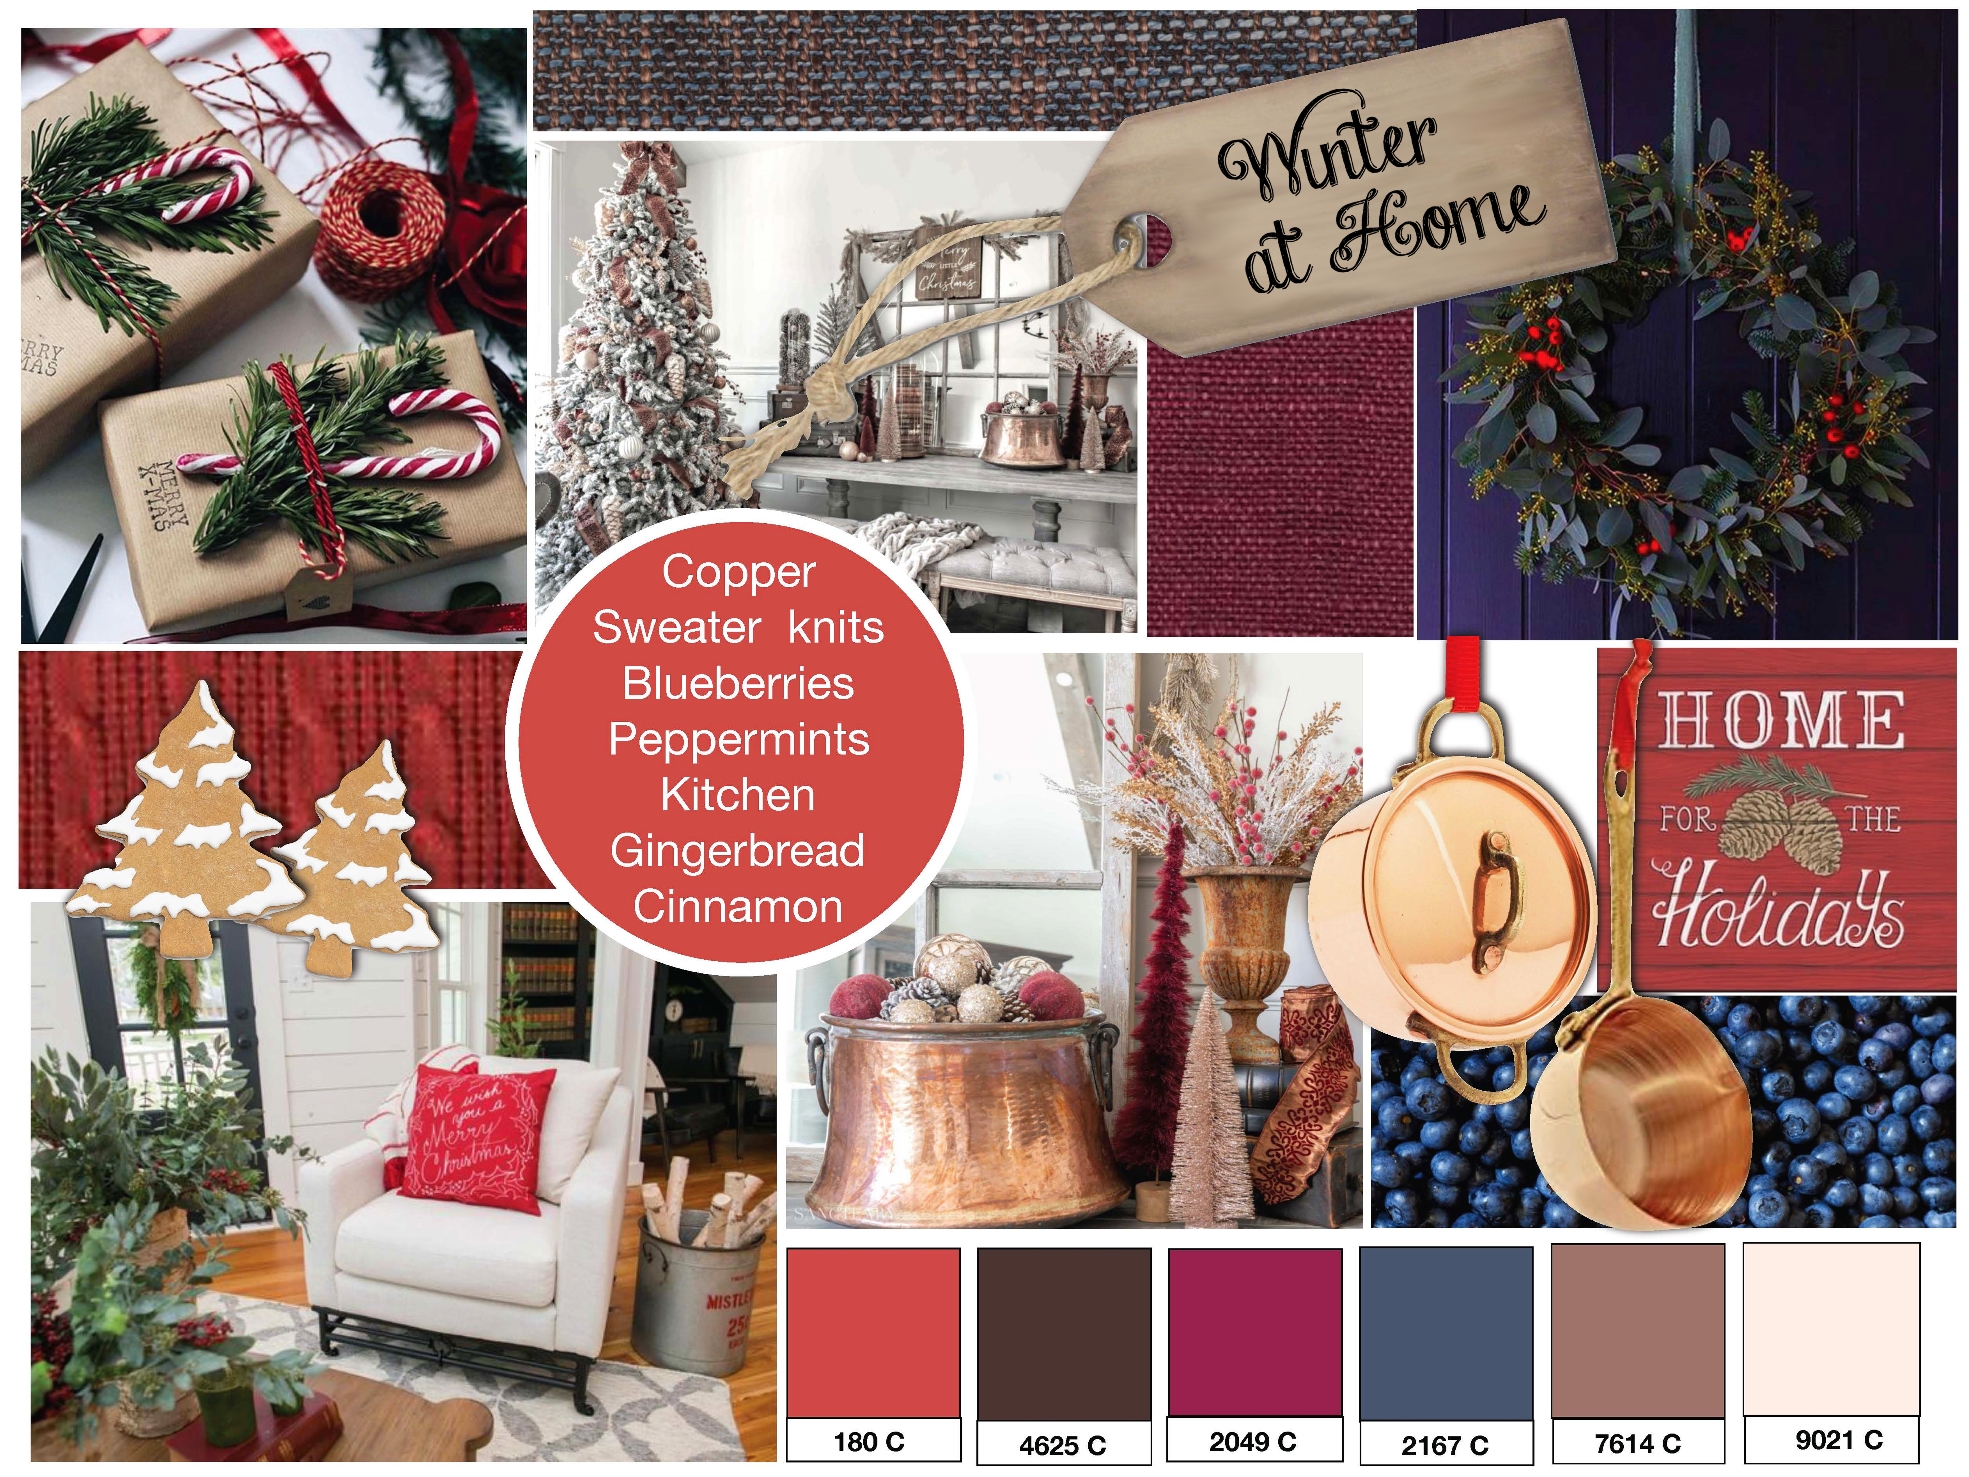 These Are The Top Christmas Decorating Trends For 2021